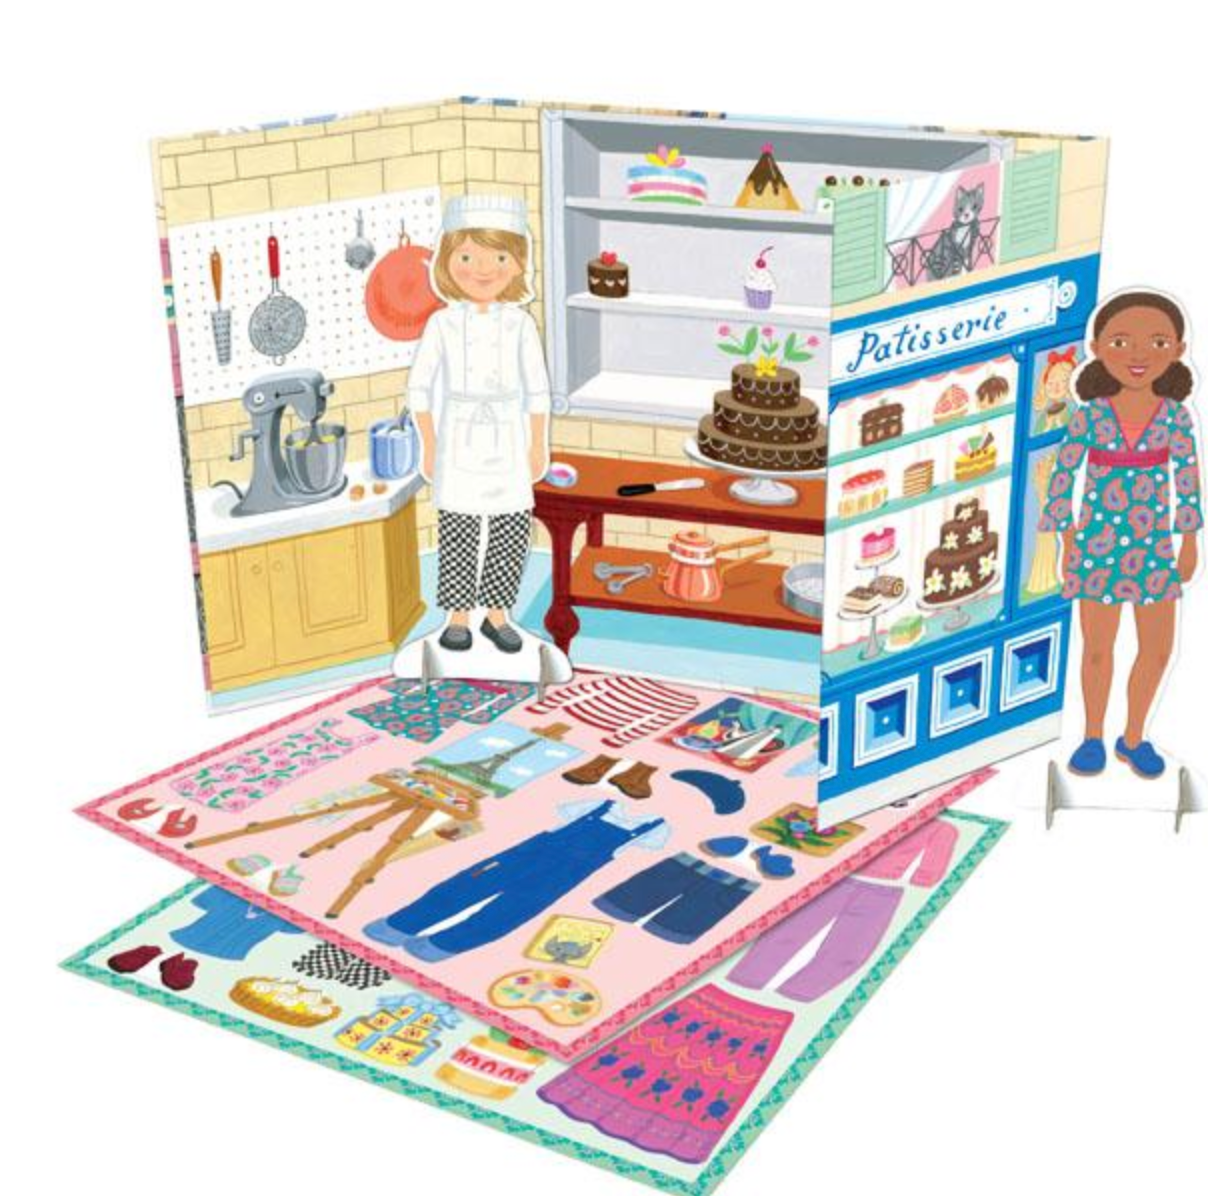 Baker and Painter Paper Dolls